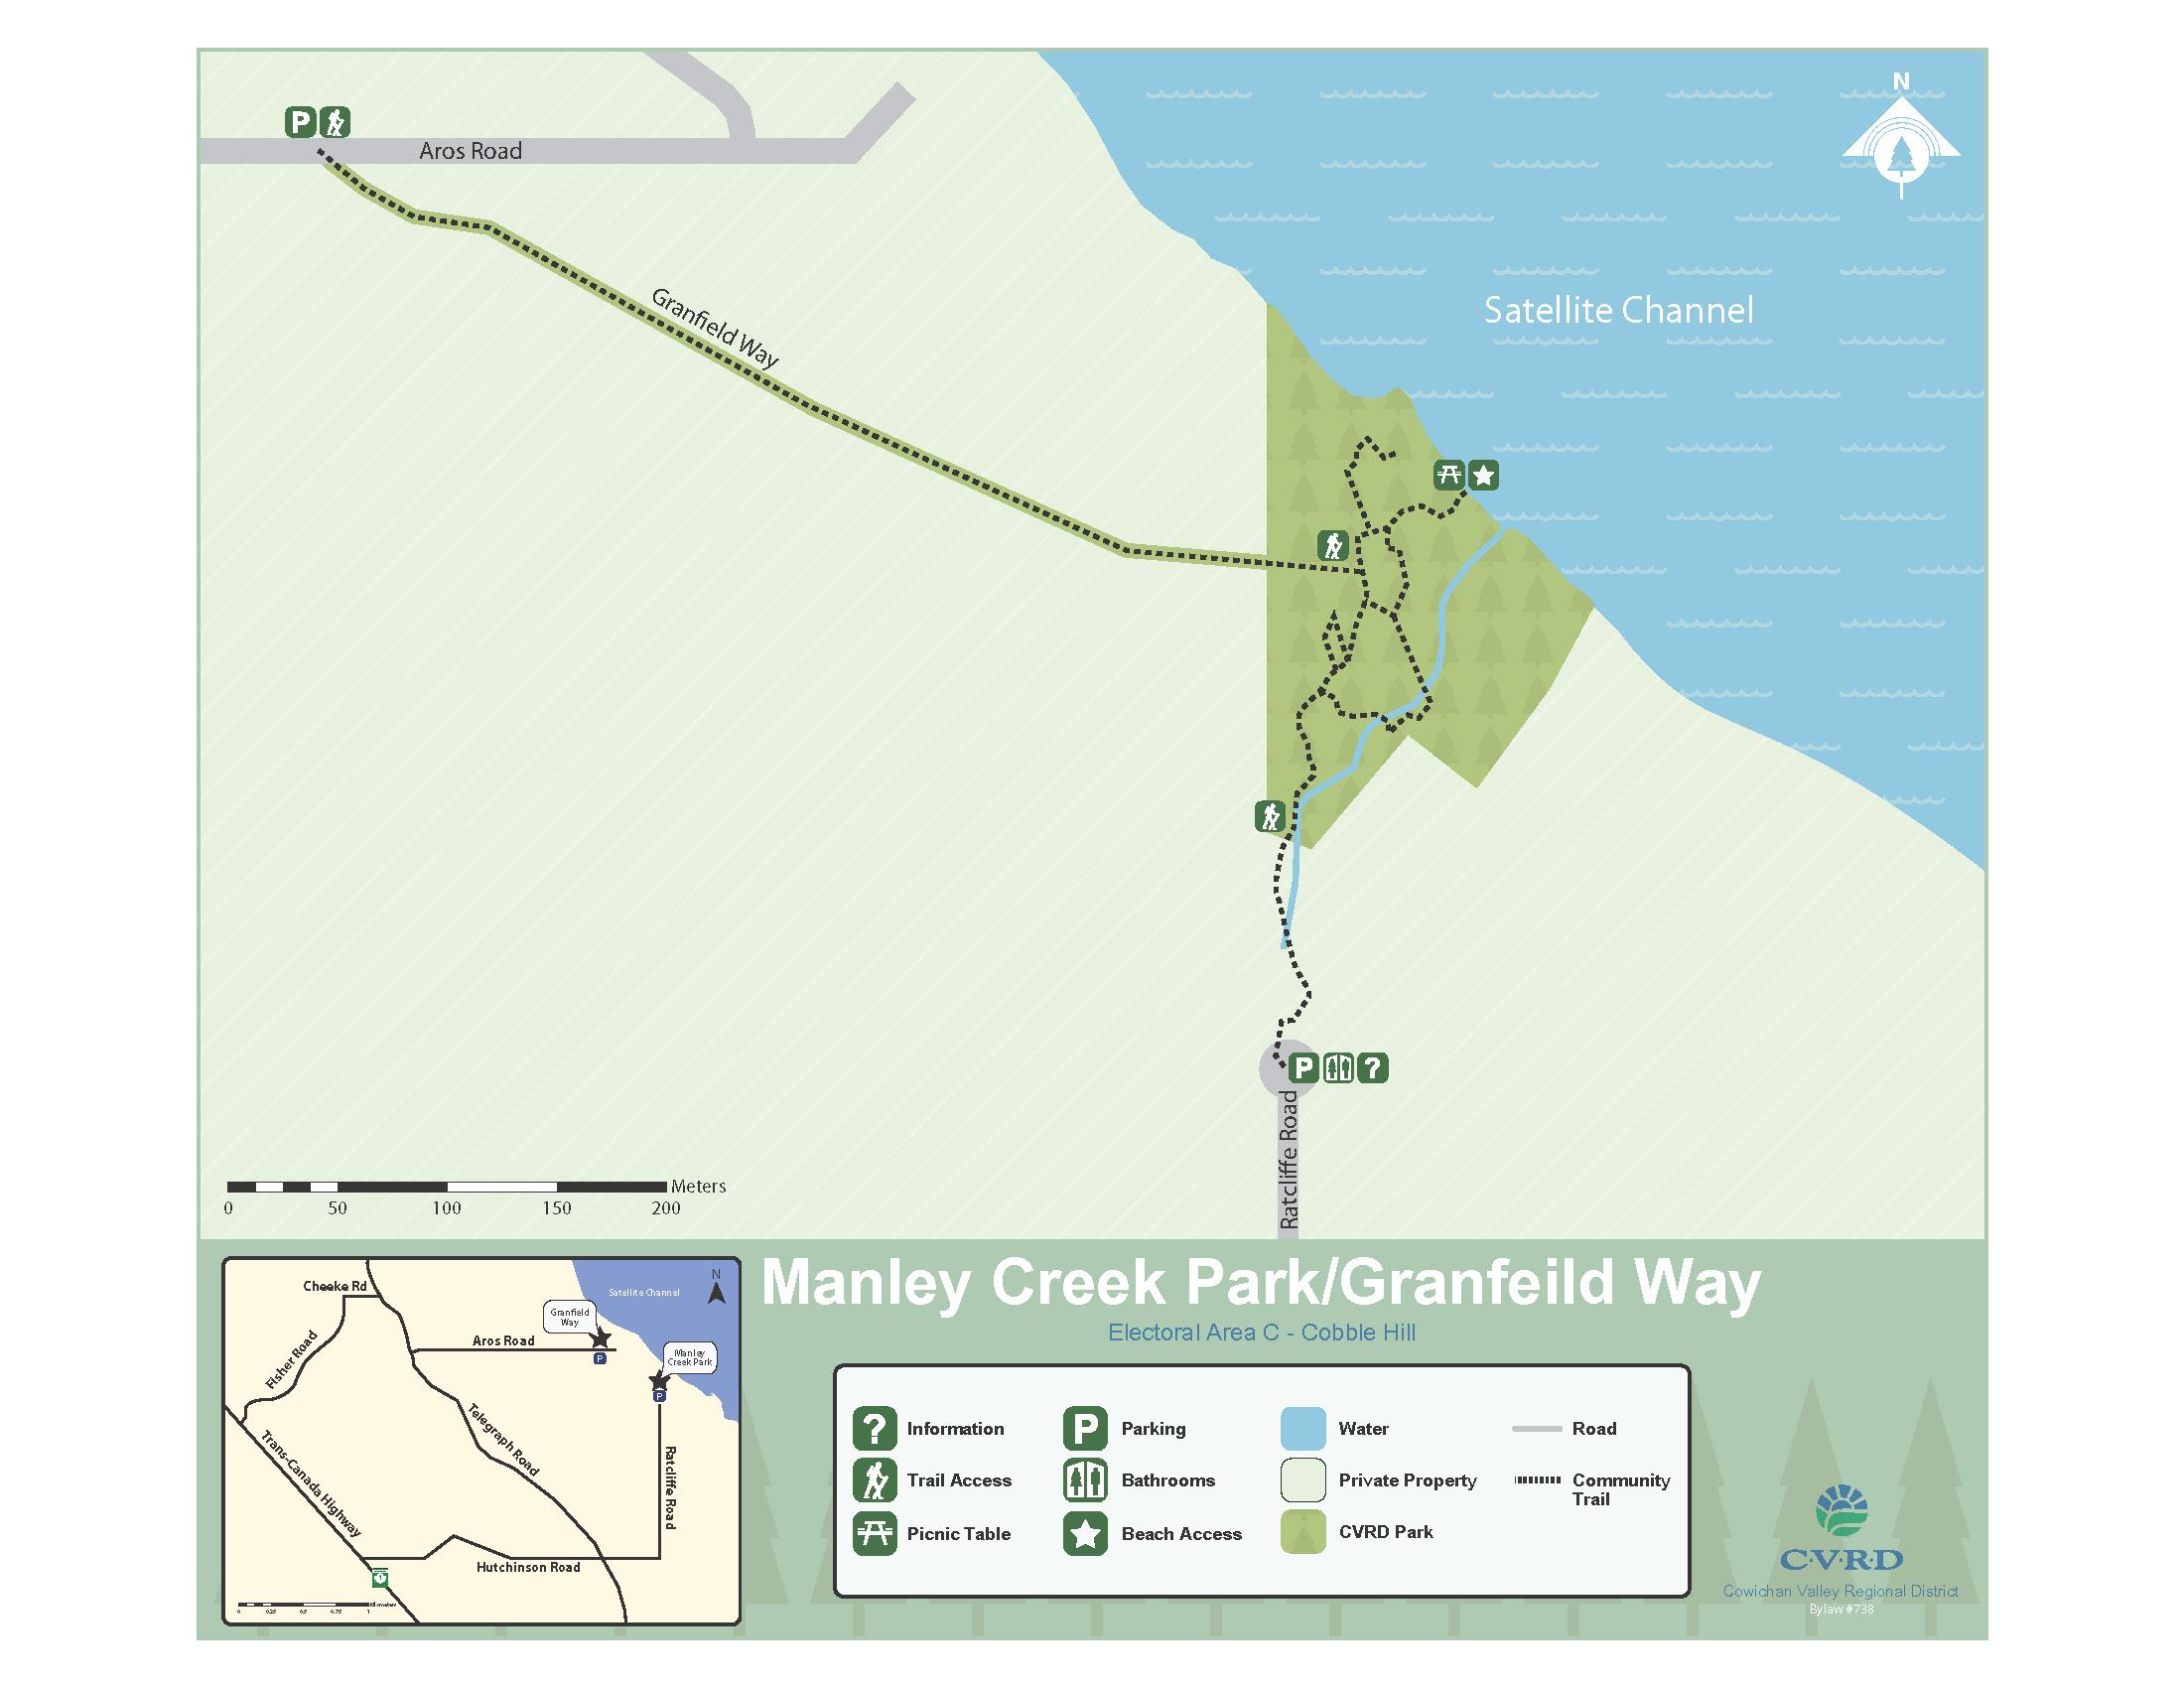 Manley Creek Park and Granfield Way map